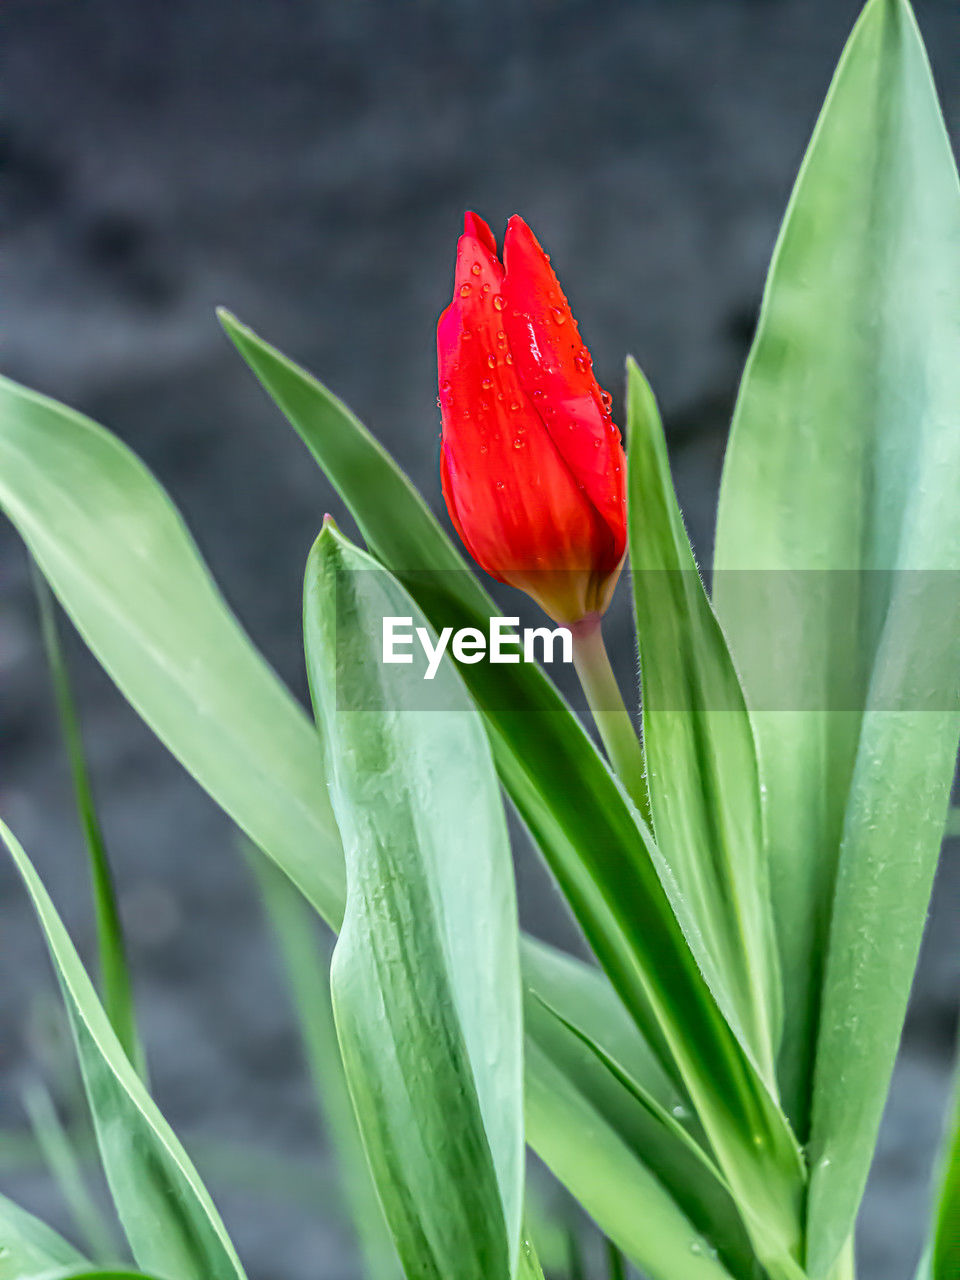 plant, flower, flowering plant, leaf, plant part, beauty in nature, green, nature, red, freshness, close-up, growth, petal, no people, plant stem, fragility, inflorescence, flower head, outdoors, tulip, vibrant color, botany, environment, blossom, focus on foreground, springtime